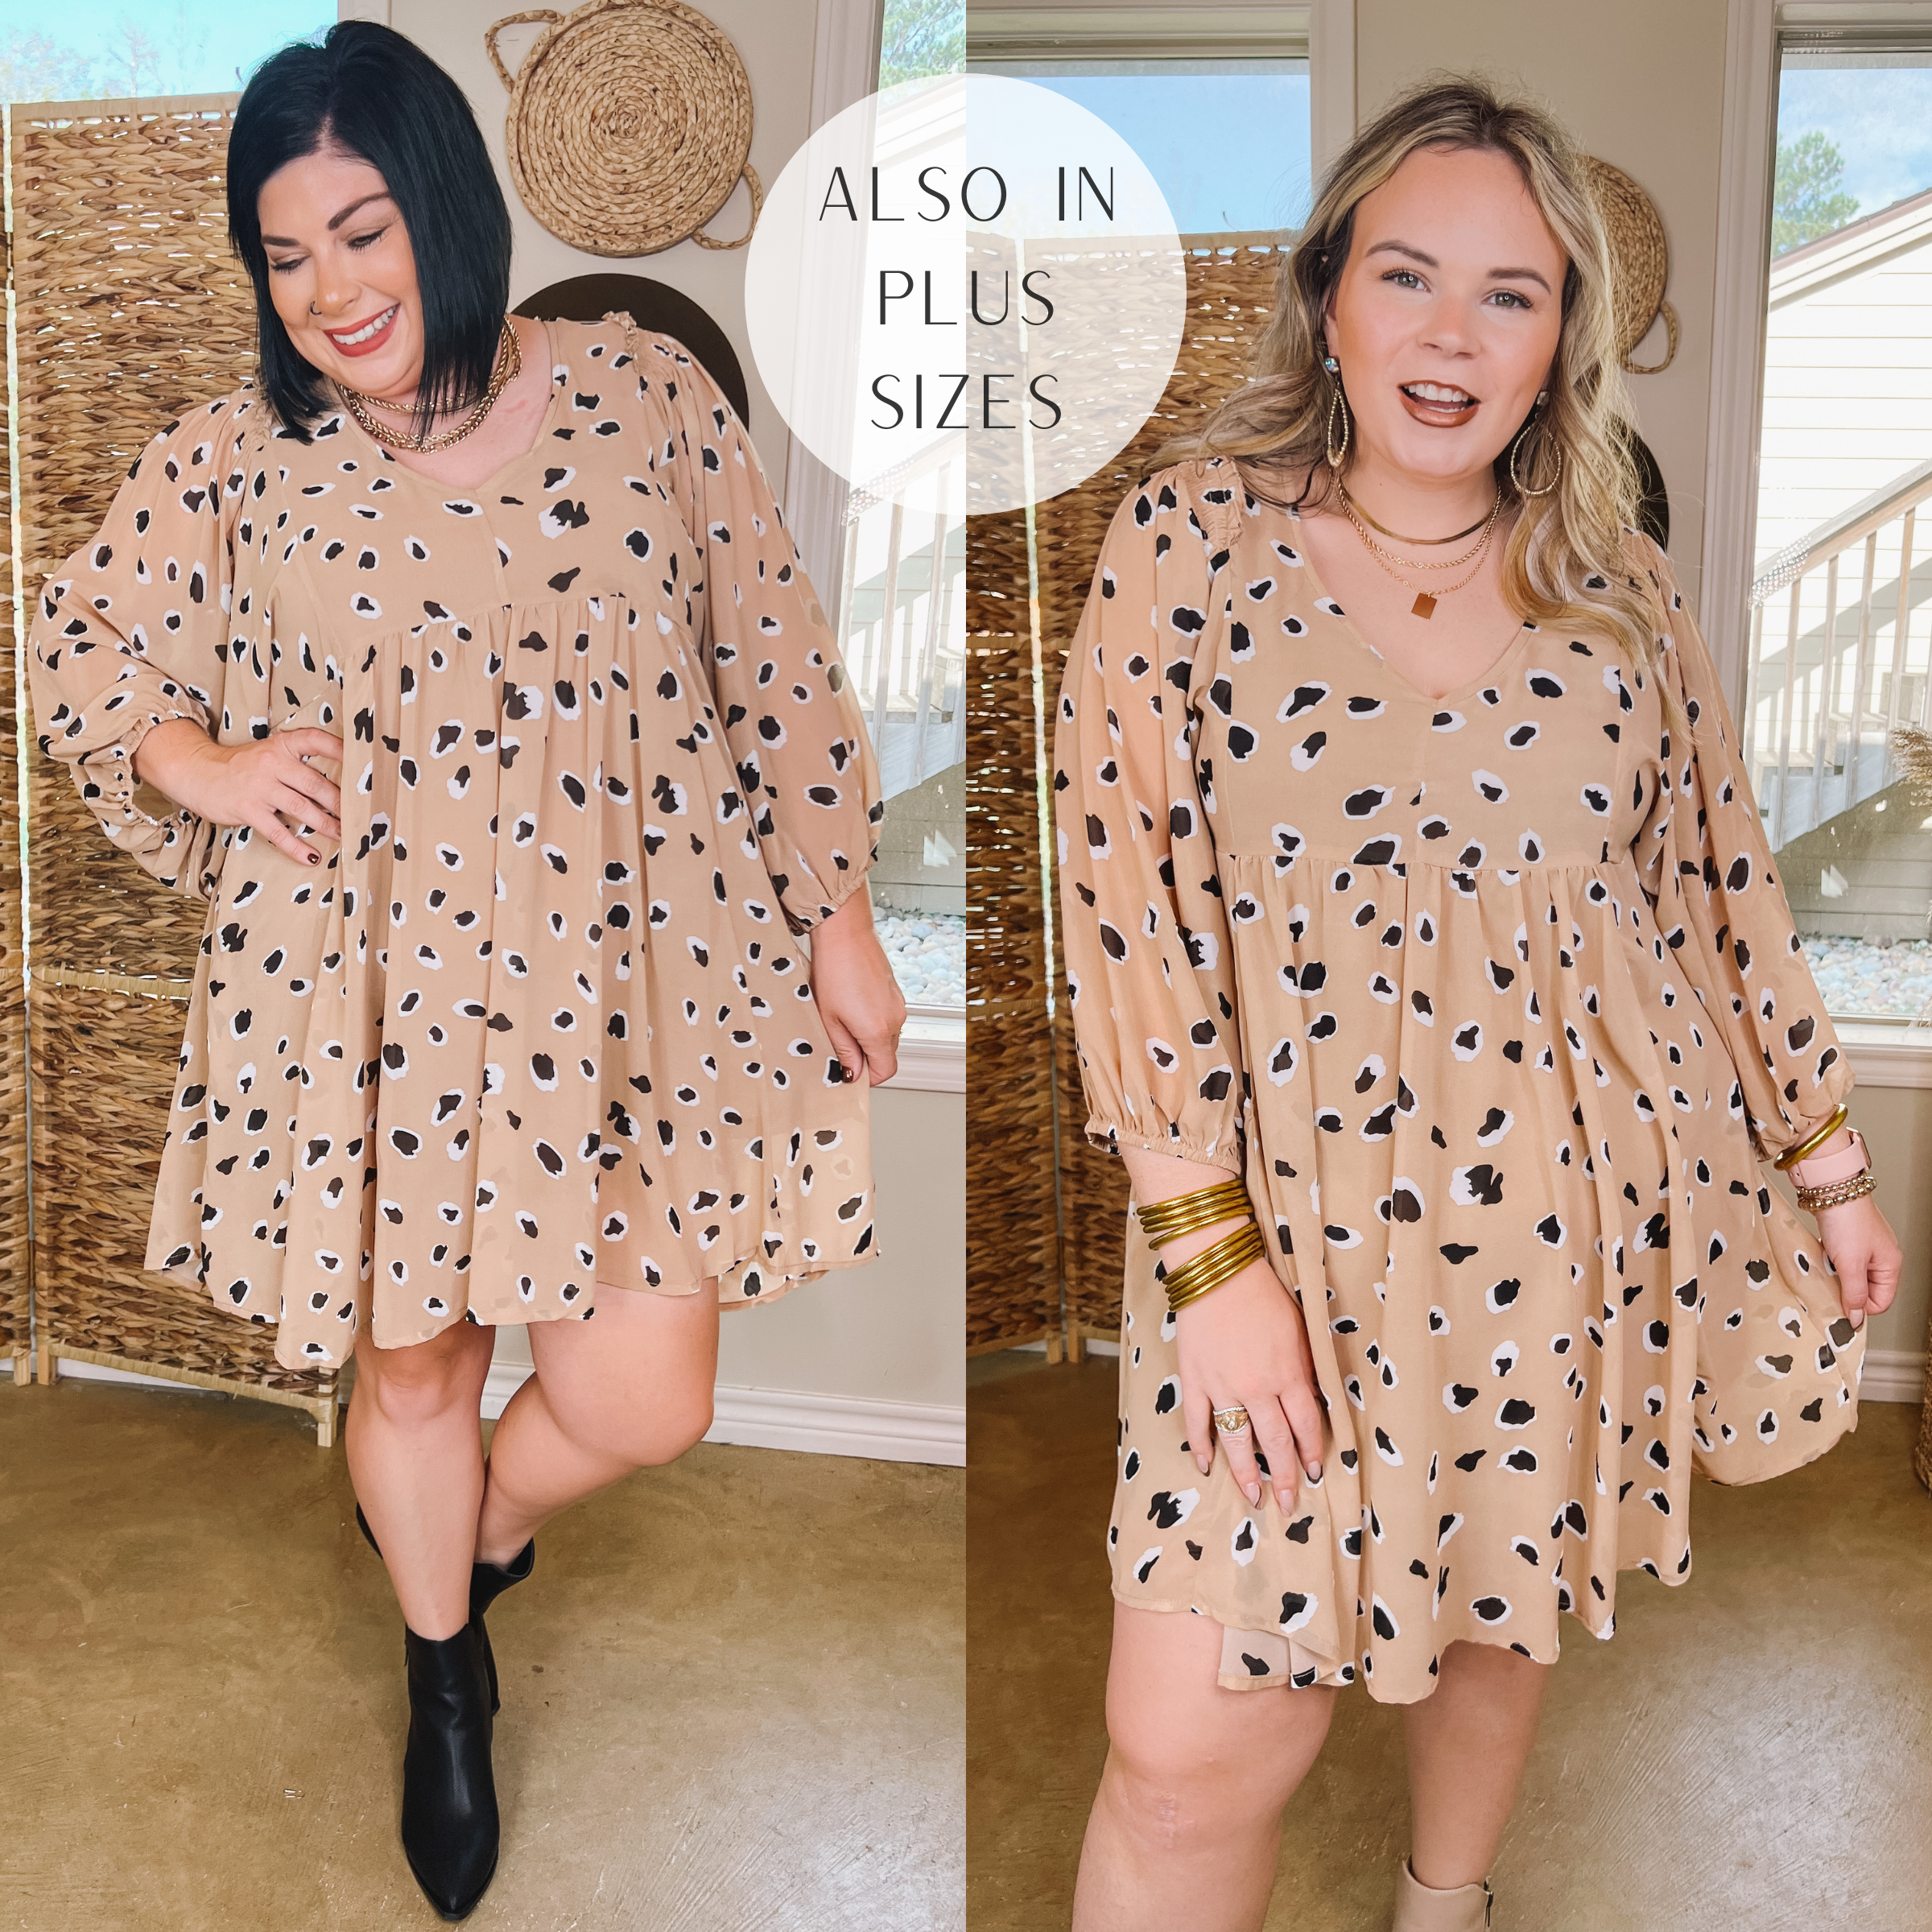 Models are wearing a taupe v neck short dress with a taupe dotted print and half sleeves. Size large model has it paired with taupe booties and gold jewelry. Plus size model has it paired with black booties and gold jewelry.